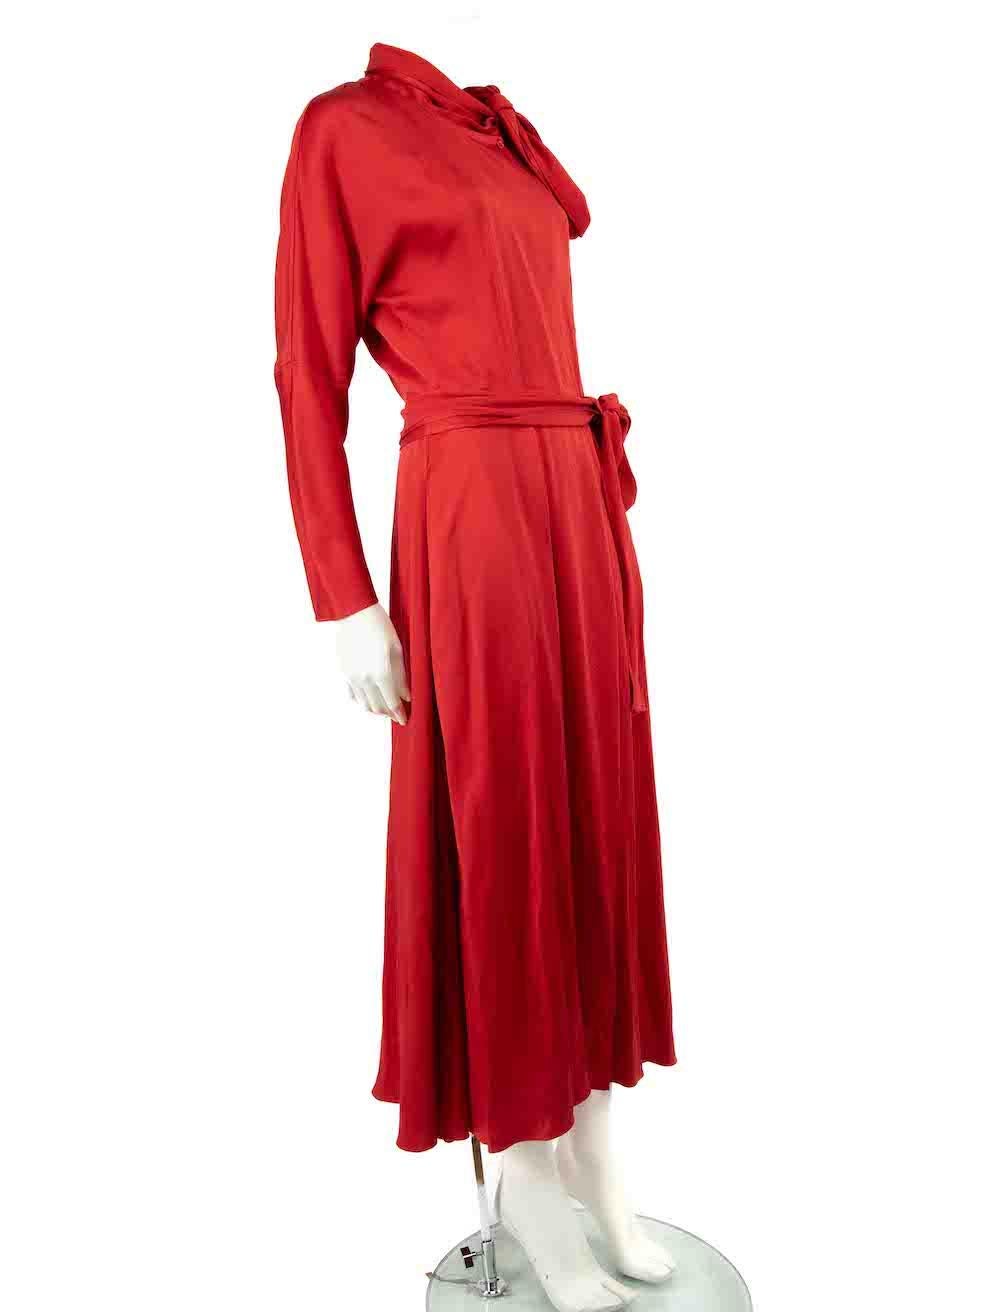 CONDITION is Very good. Minimal wear to the dress is evident. Minimal wear to the hemline and sleeve ends is seen with discolouration marks with a pull to the weave near the waistline tie detailing on this used Sies Marjan designer resale item.
 
 
